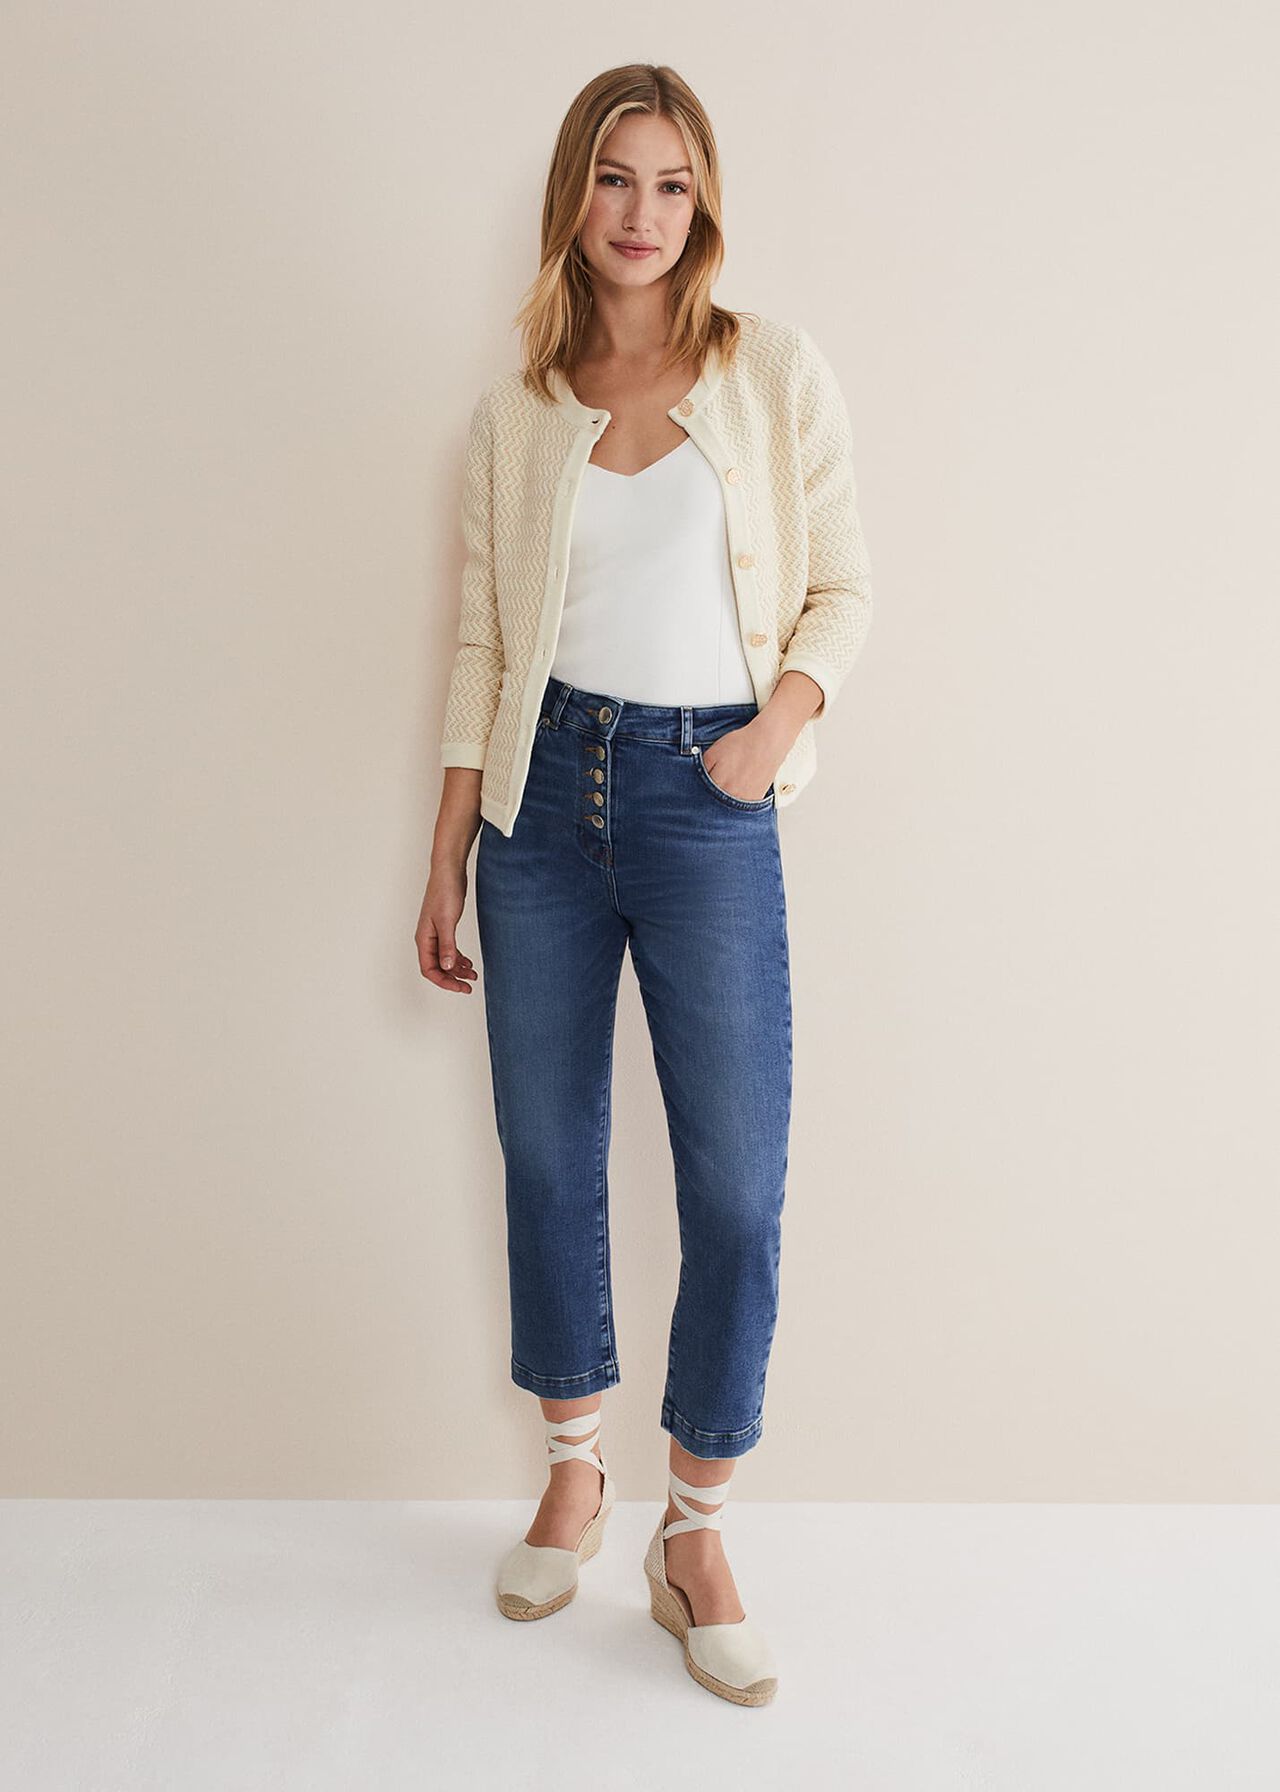 Cove Ribbed Cropped Jacket